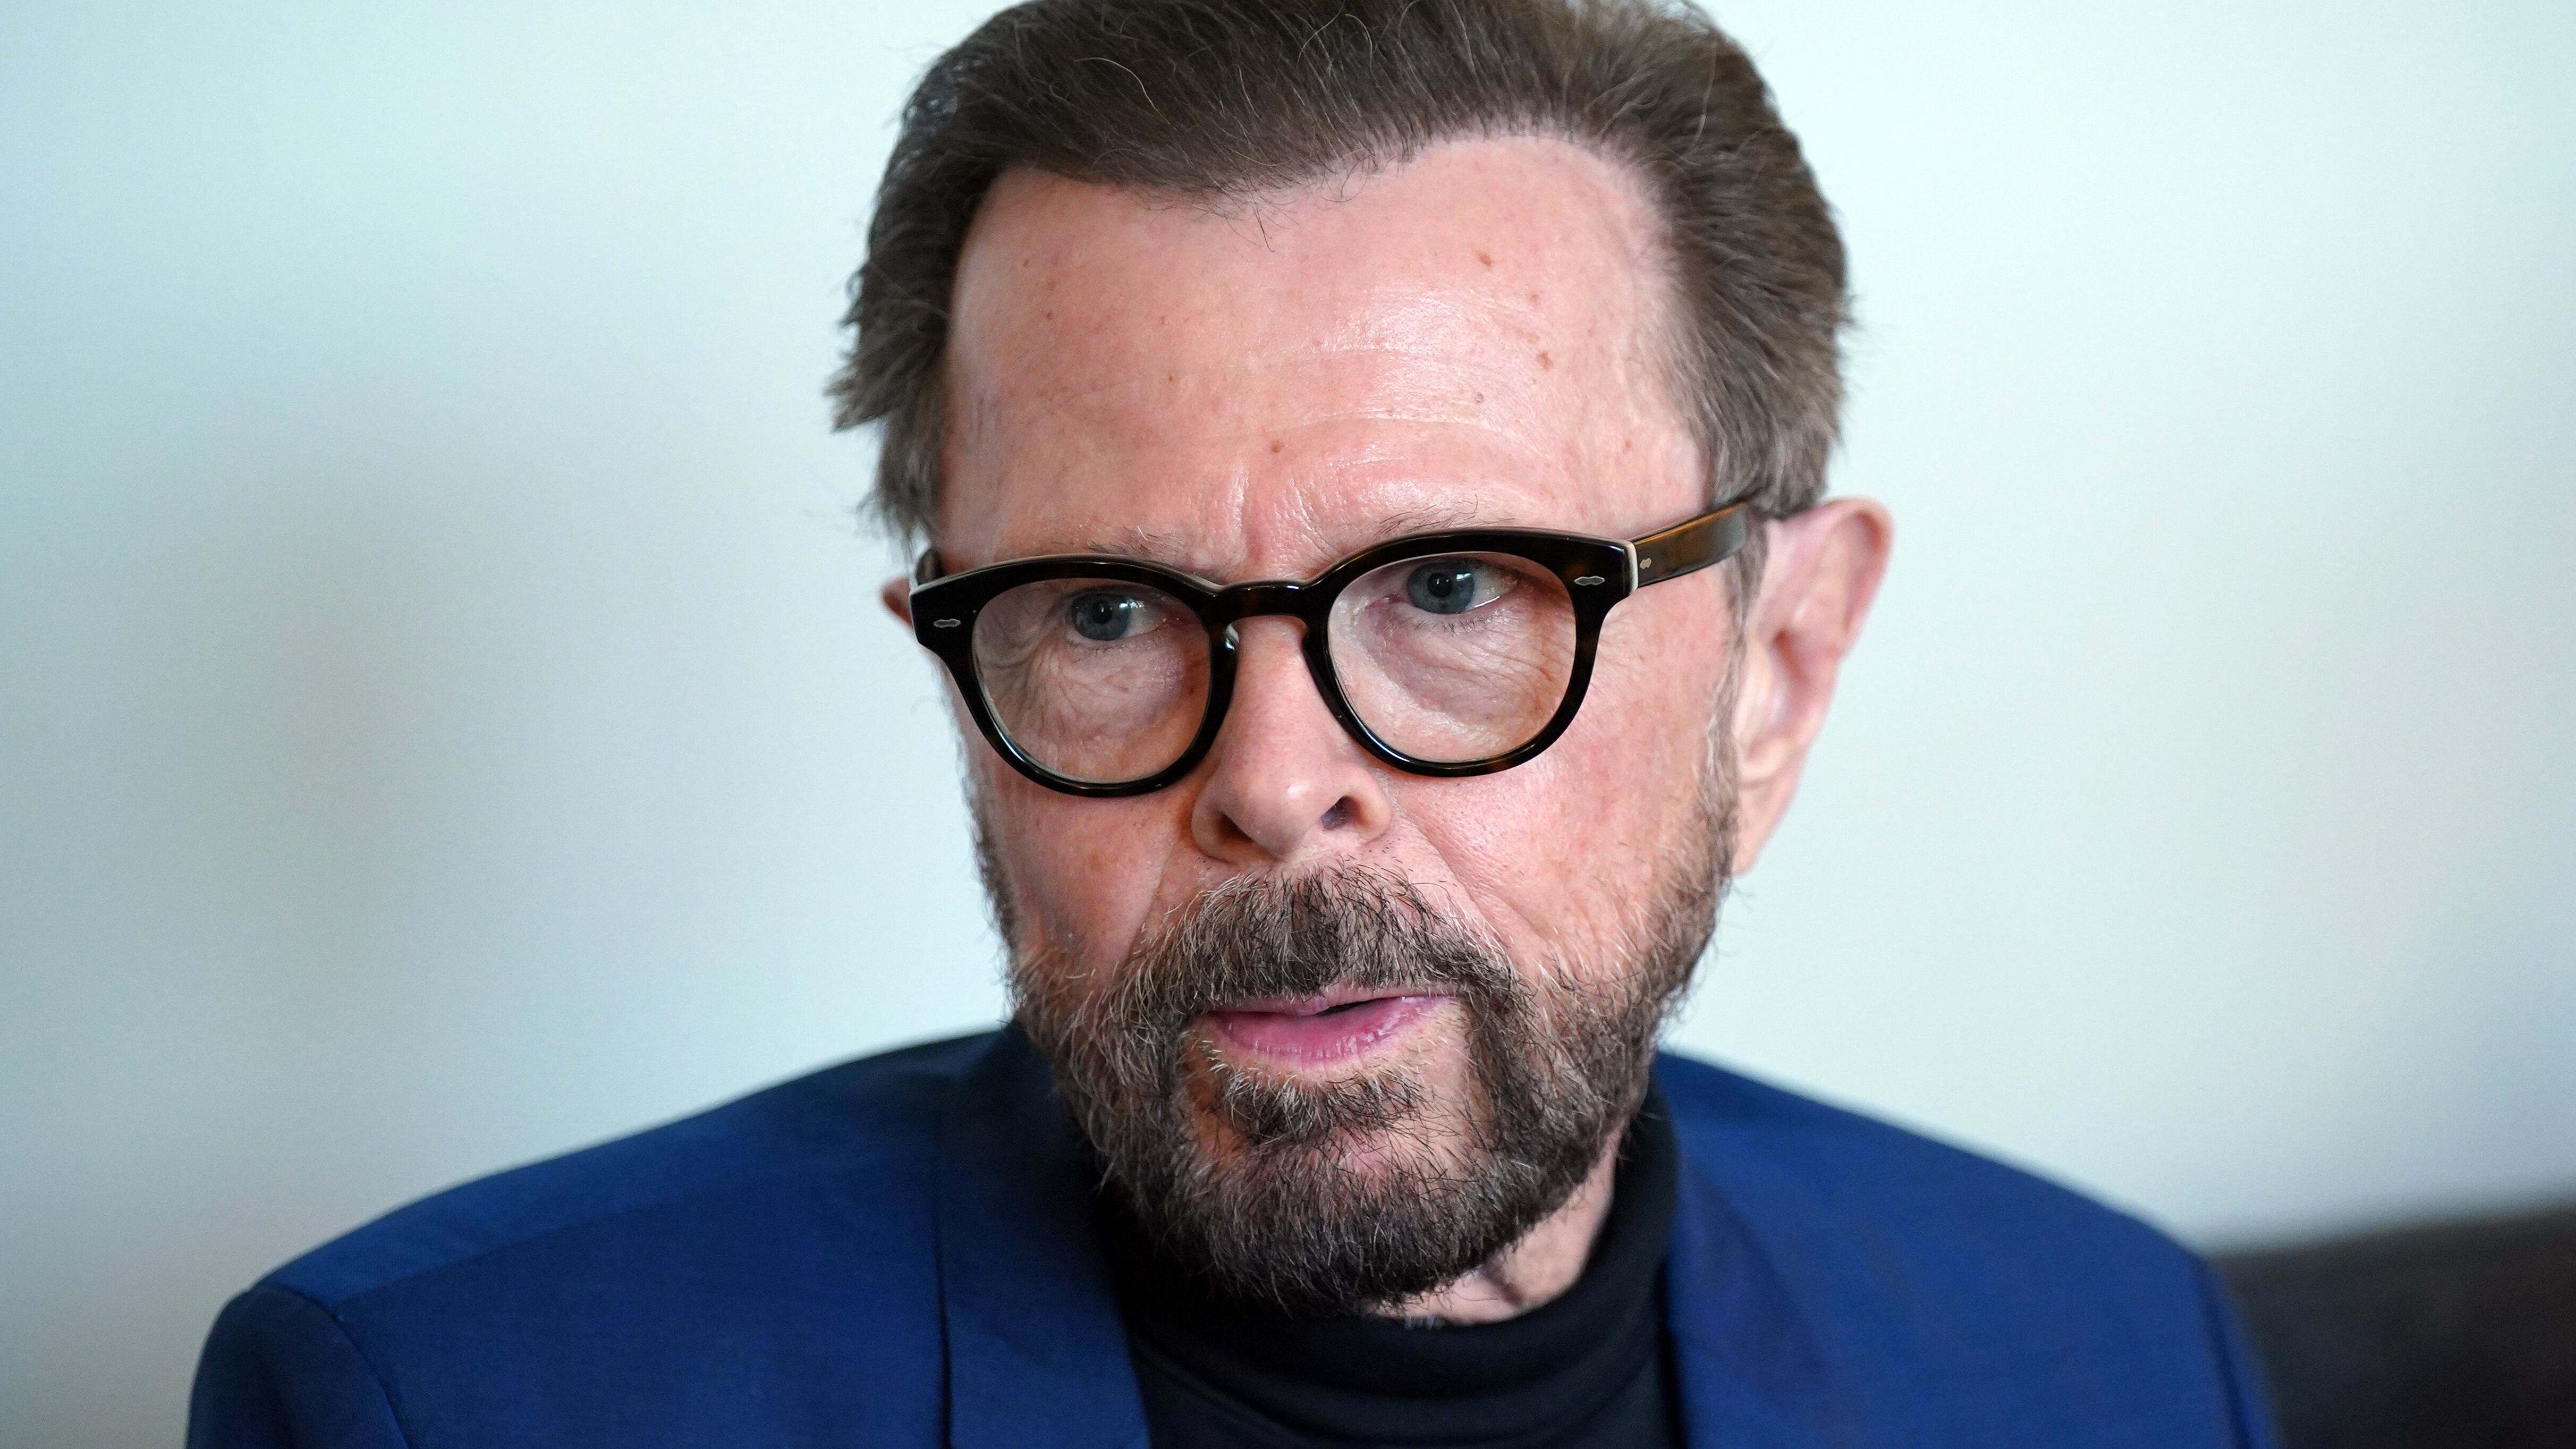 Bjorn Ulvaeus from Abba says he would have preferred the band to have a ‘cool name’ like ‘The Northern Lights’